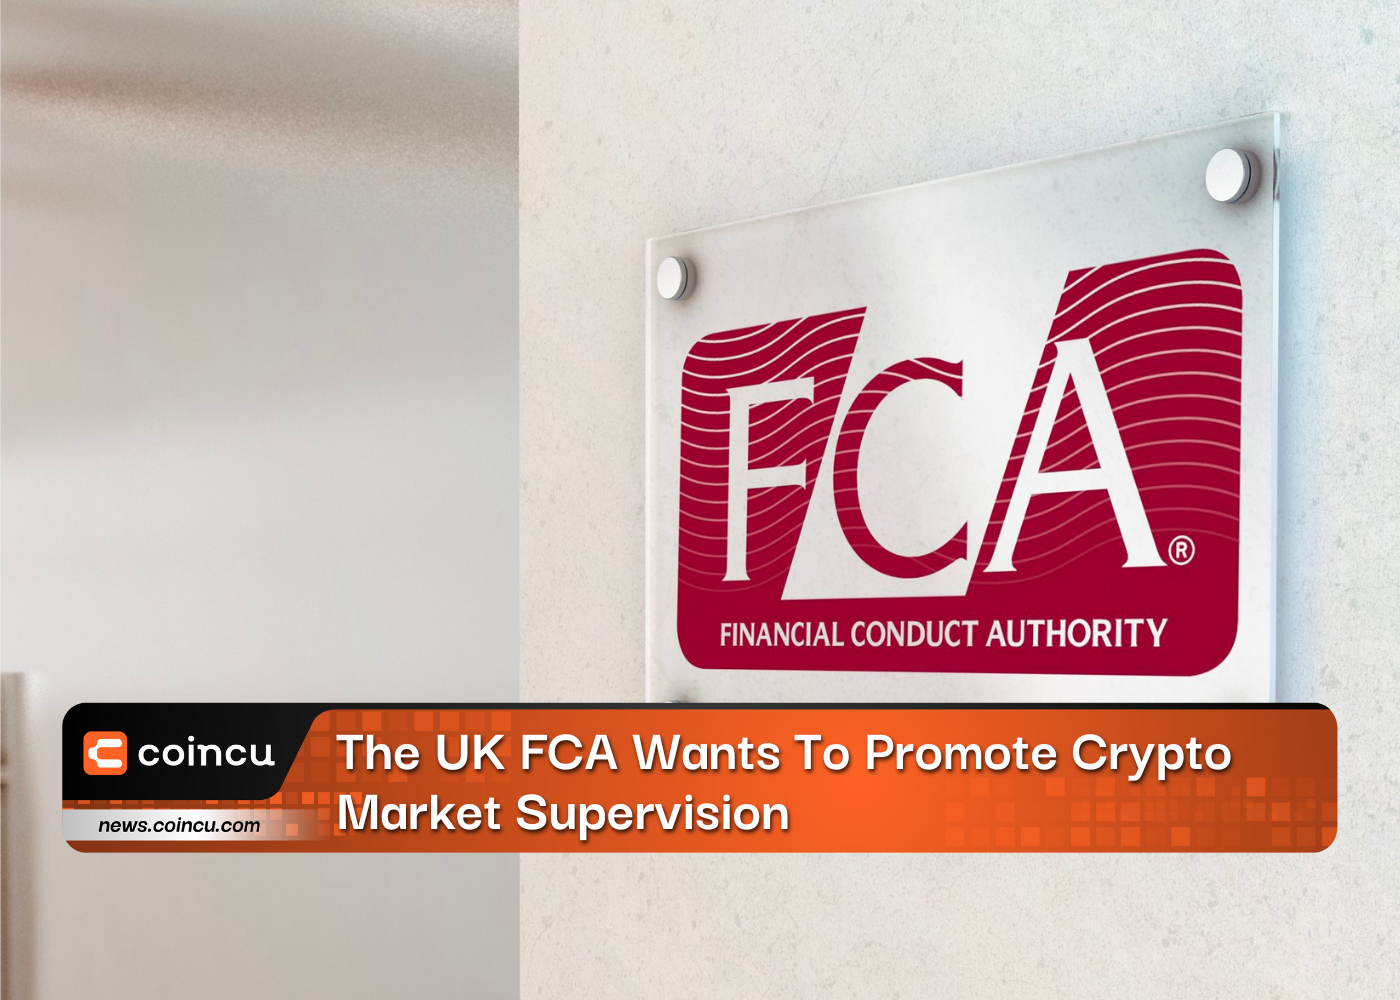 The UK FCA Wants To Promote Crypto Market Supervision